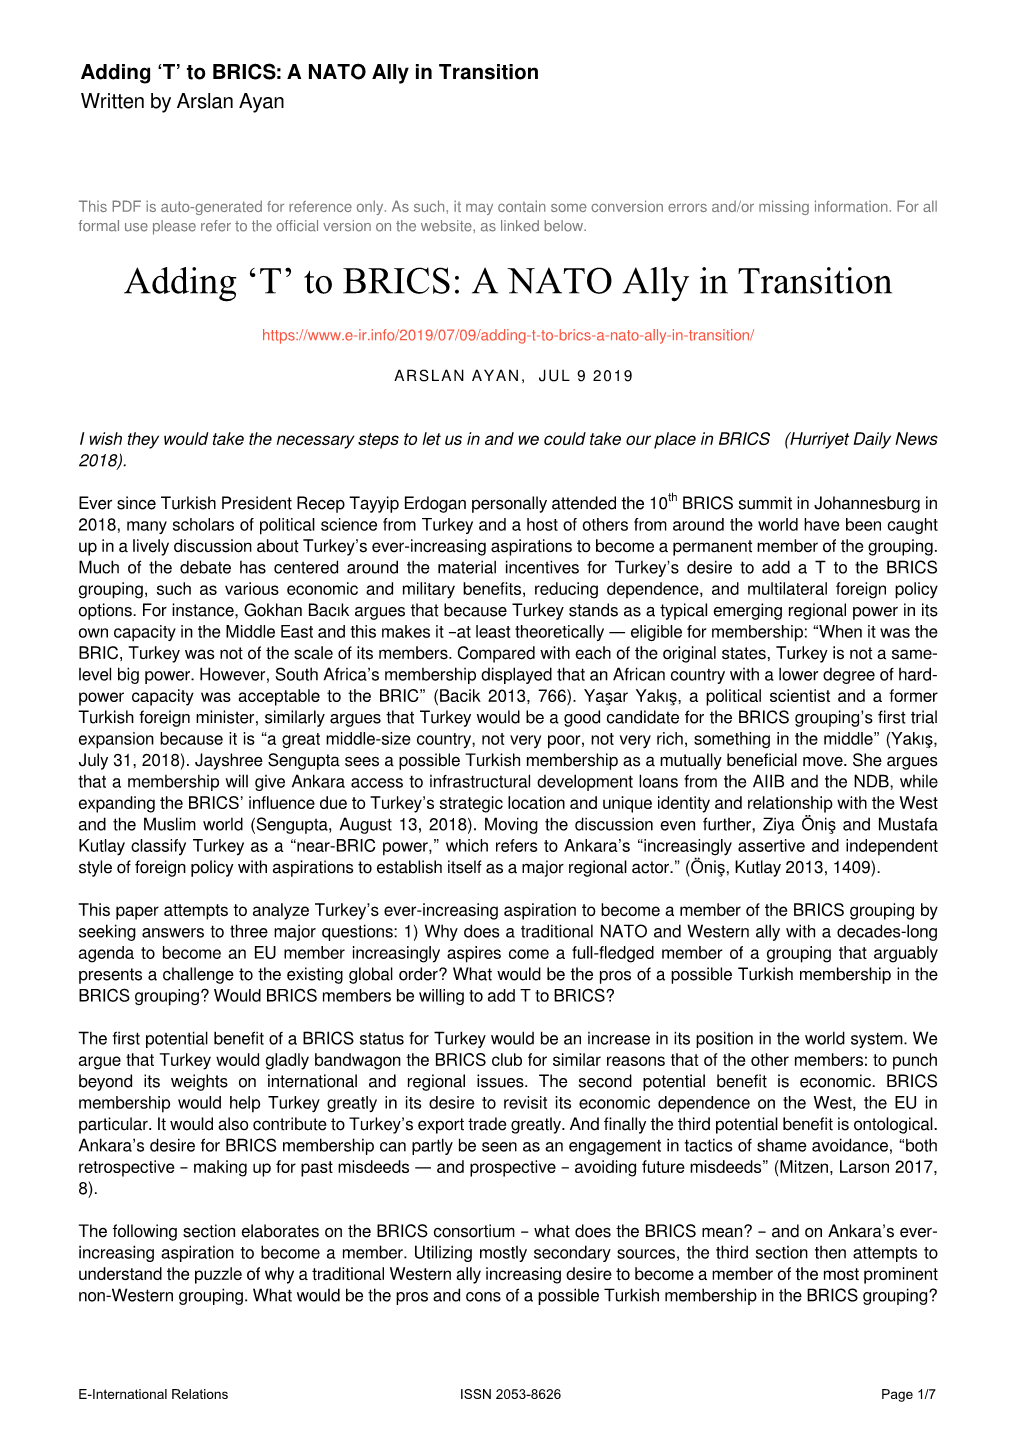 To BRICS: a NATO Ally in Transition Written by Arslan Ayan